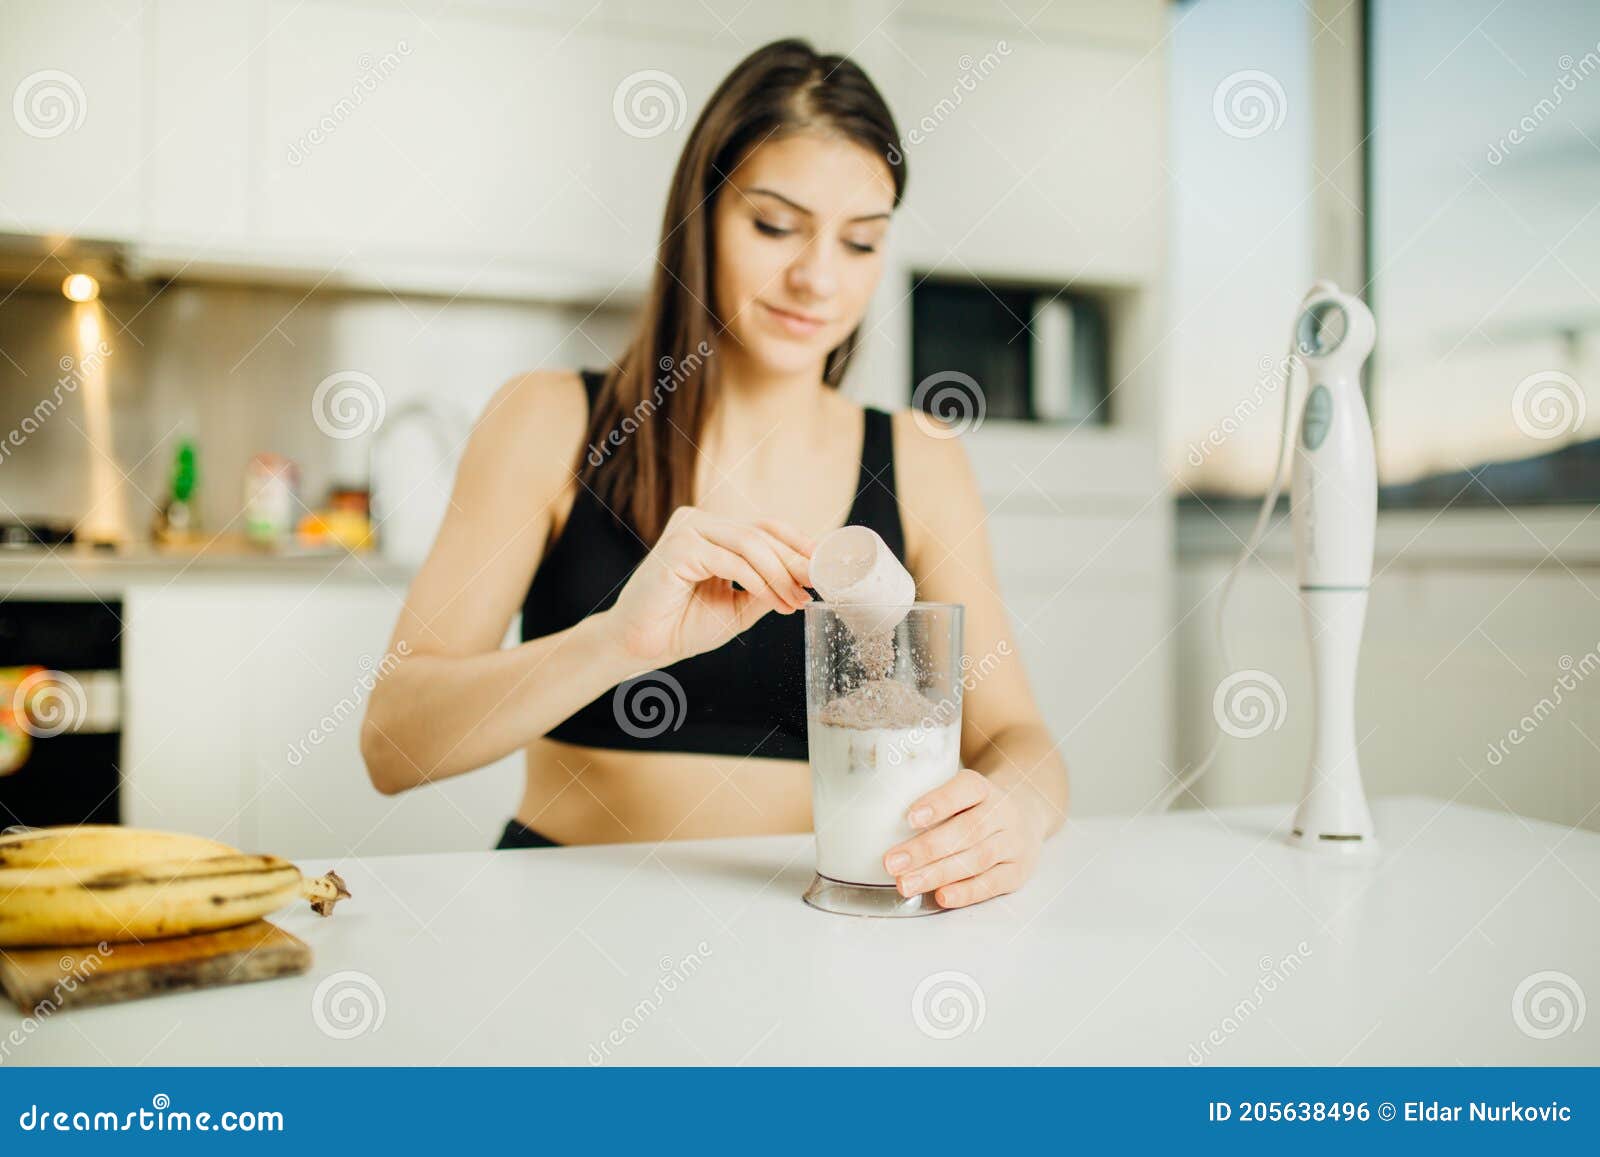 woman with immersion blender making banana chocolate protein powder milkshake smoothie.adding a scoop of low carb whey protein mix